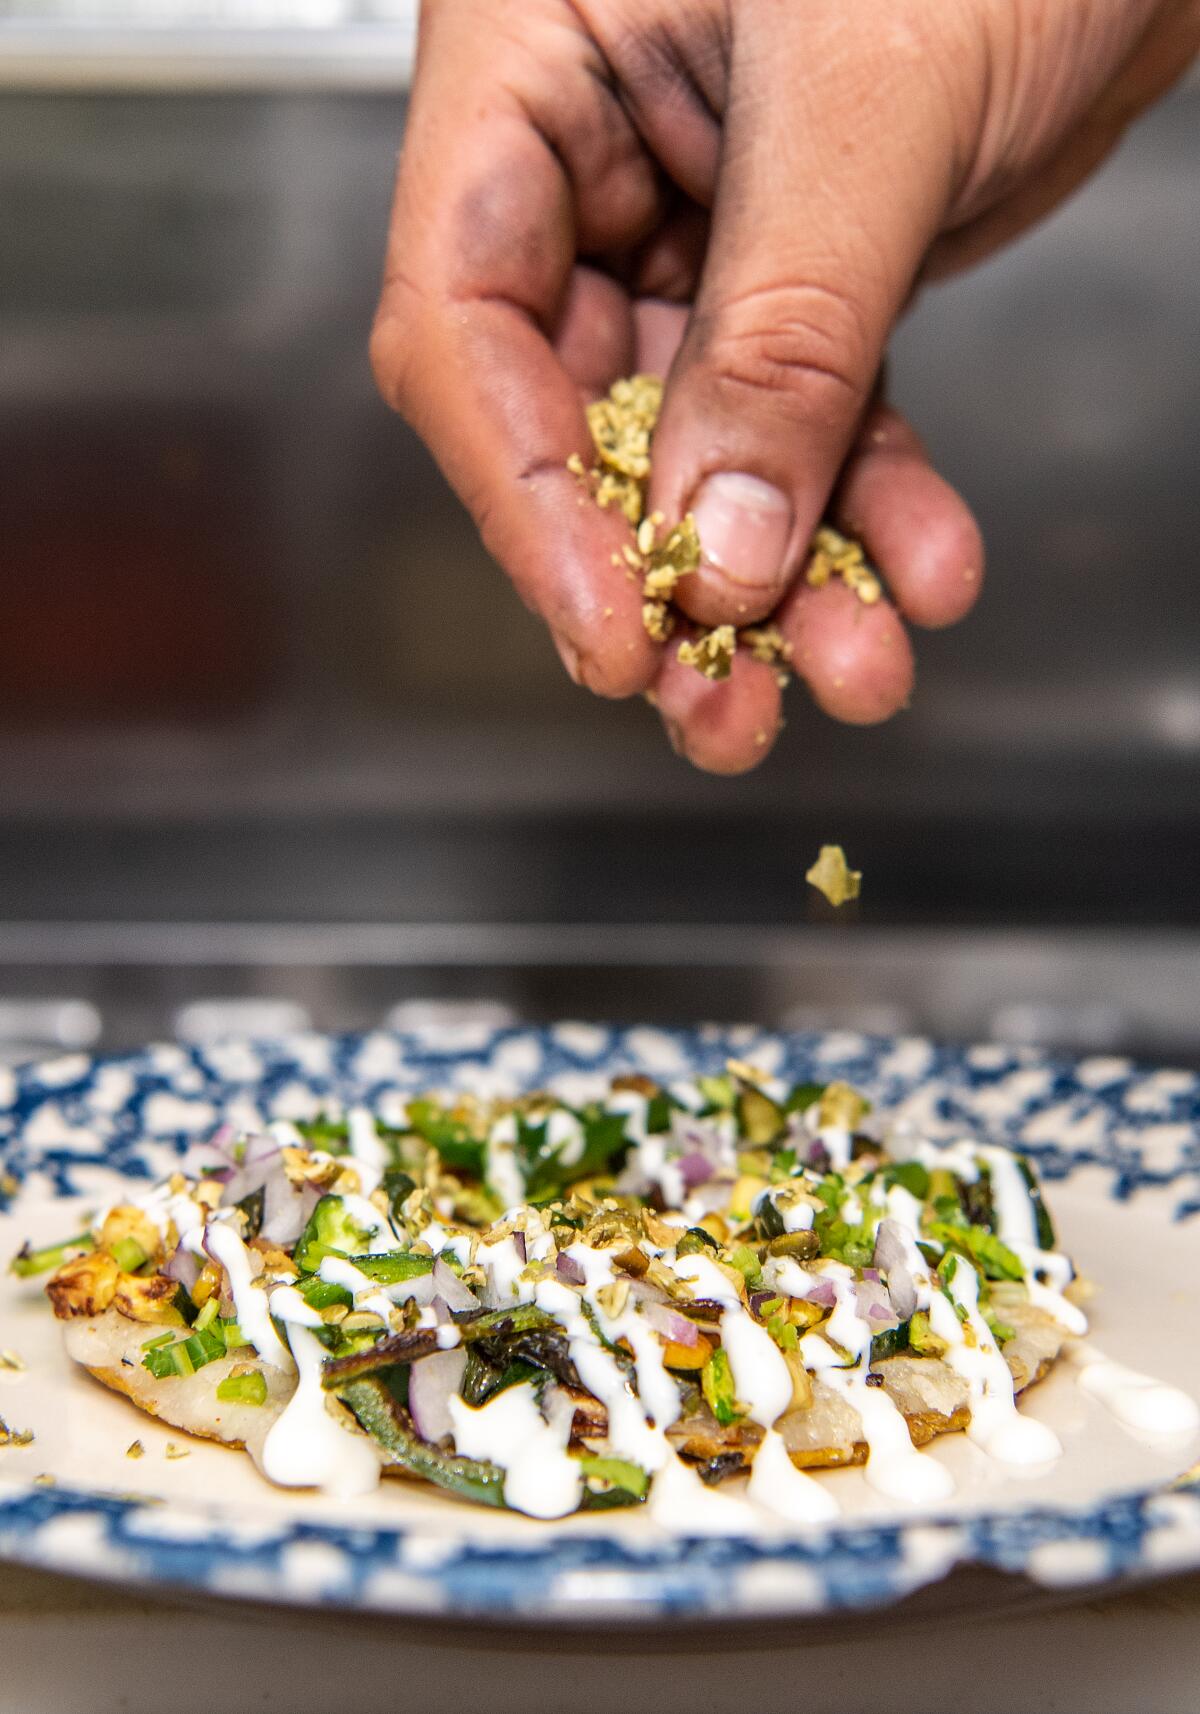 The popular rajas taco from Masataco features pasilla peppers, squash and pepitas.